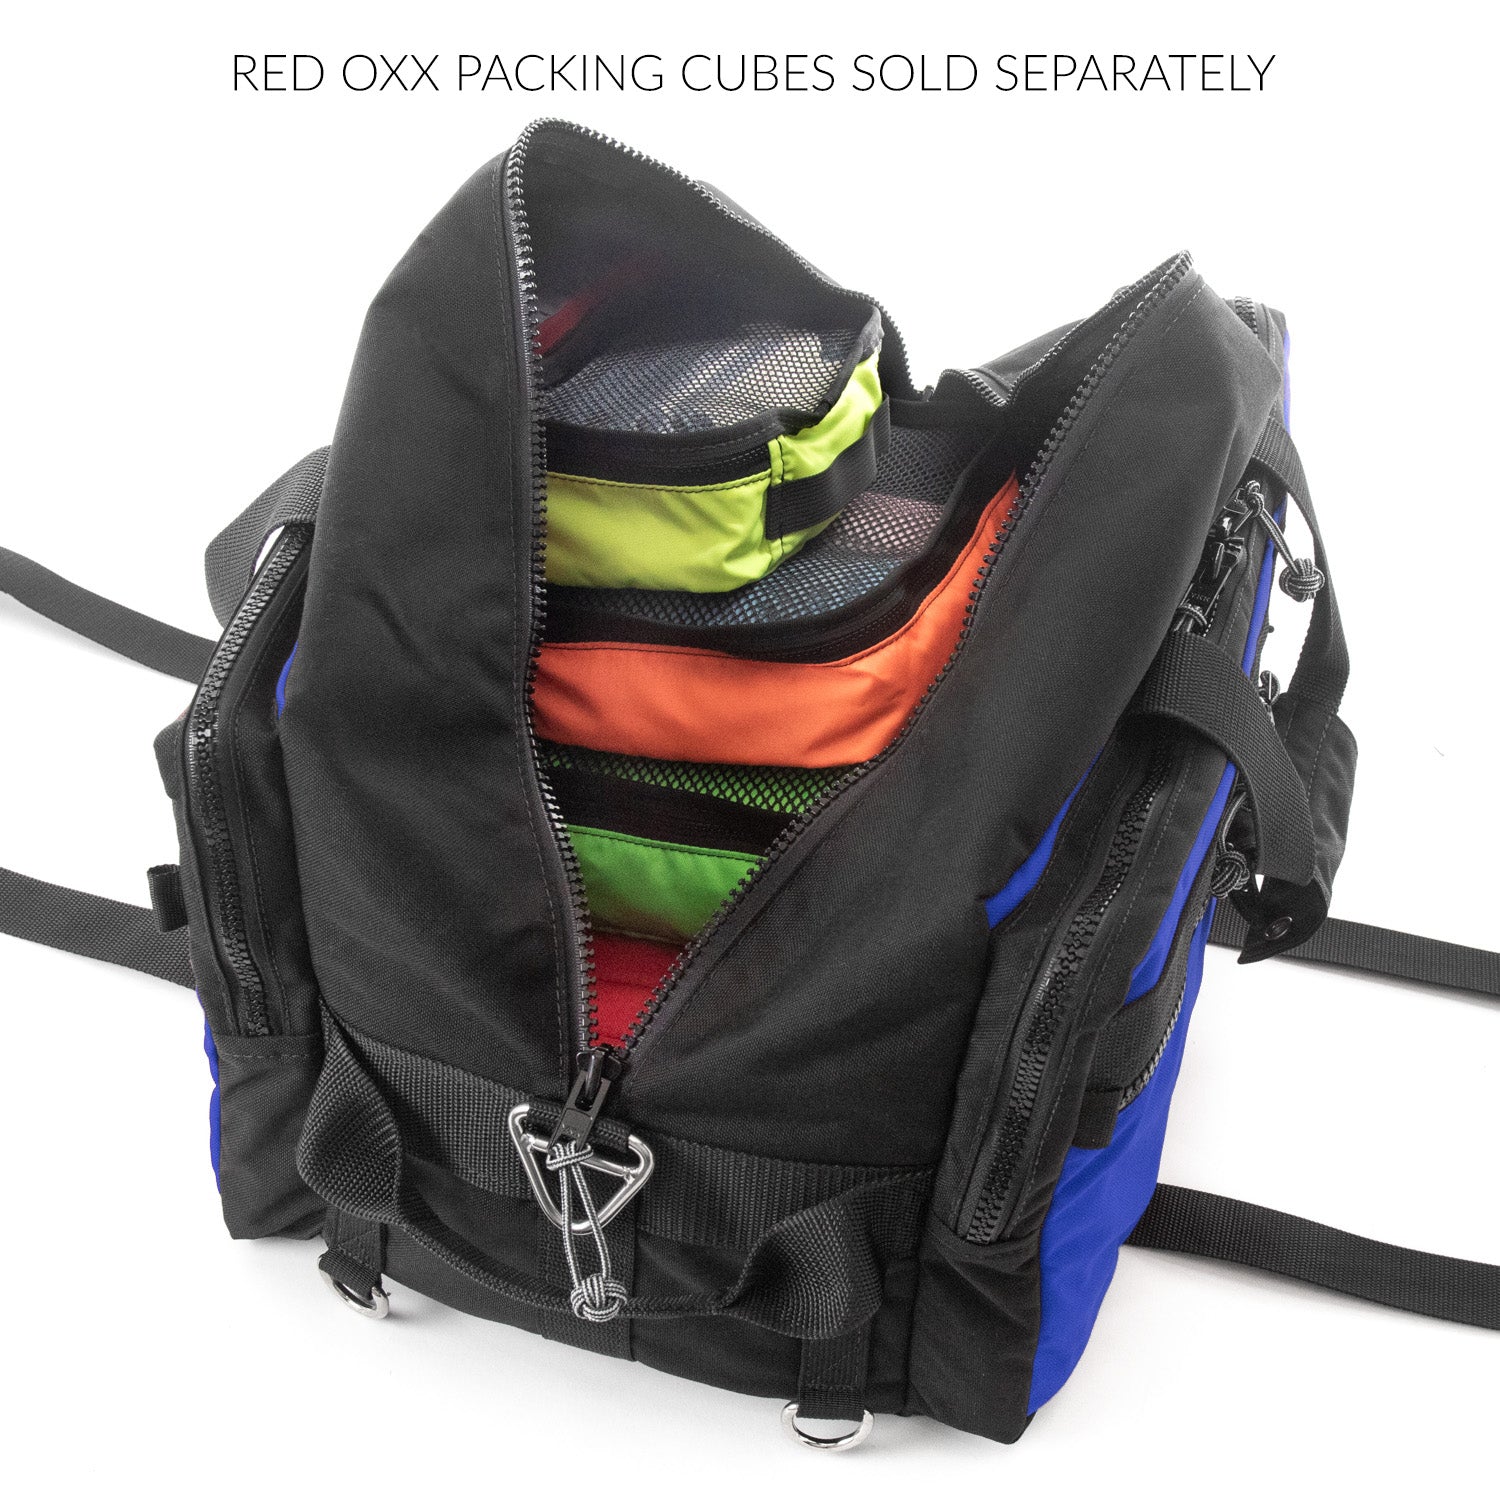 Main compartment with packing cubes sold- Red Oxx packing cubes sold separately.  